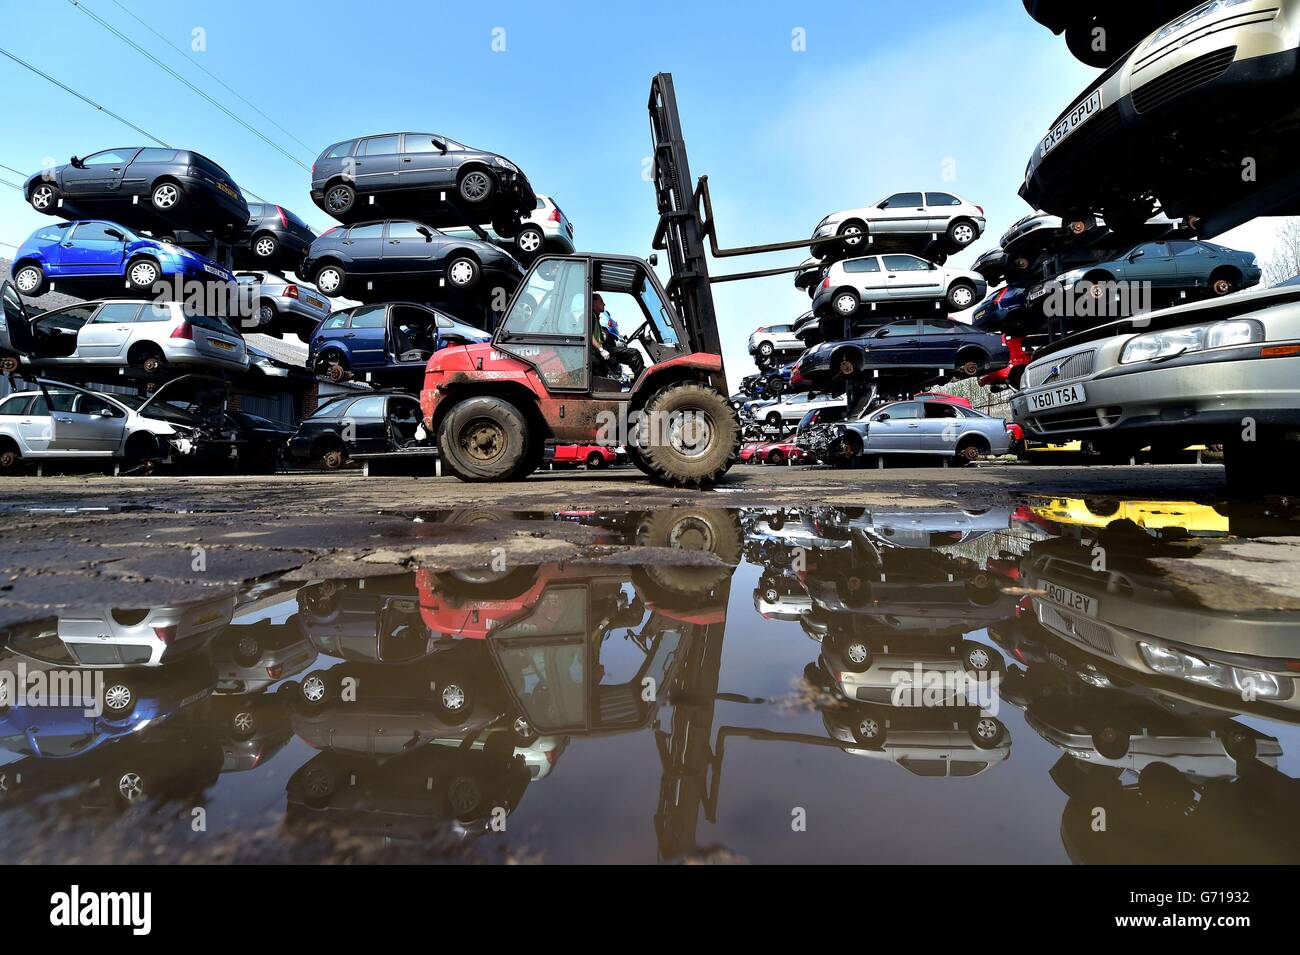 A worker at the UK's largest car dismantlers, Motor Hog in North Shields, Tyneside, which has bought specialist dismantling and de-polluting equipment capable of handling over 200 vehicles per day and crushing hundreds of thousands a year. Stock Photo